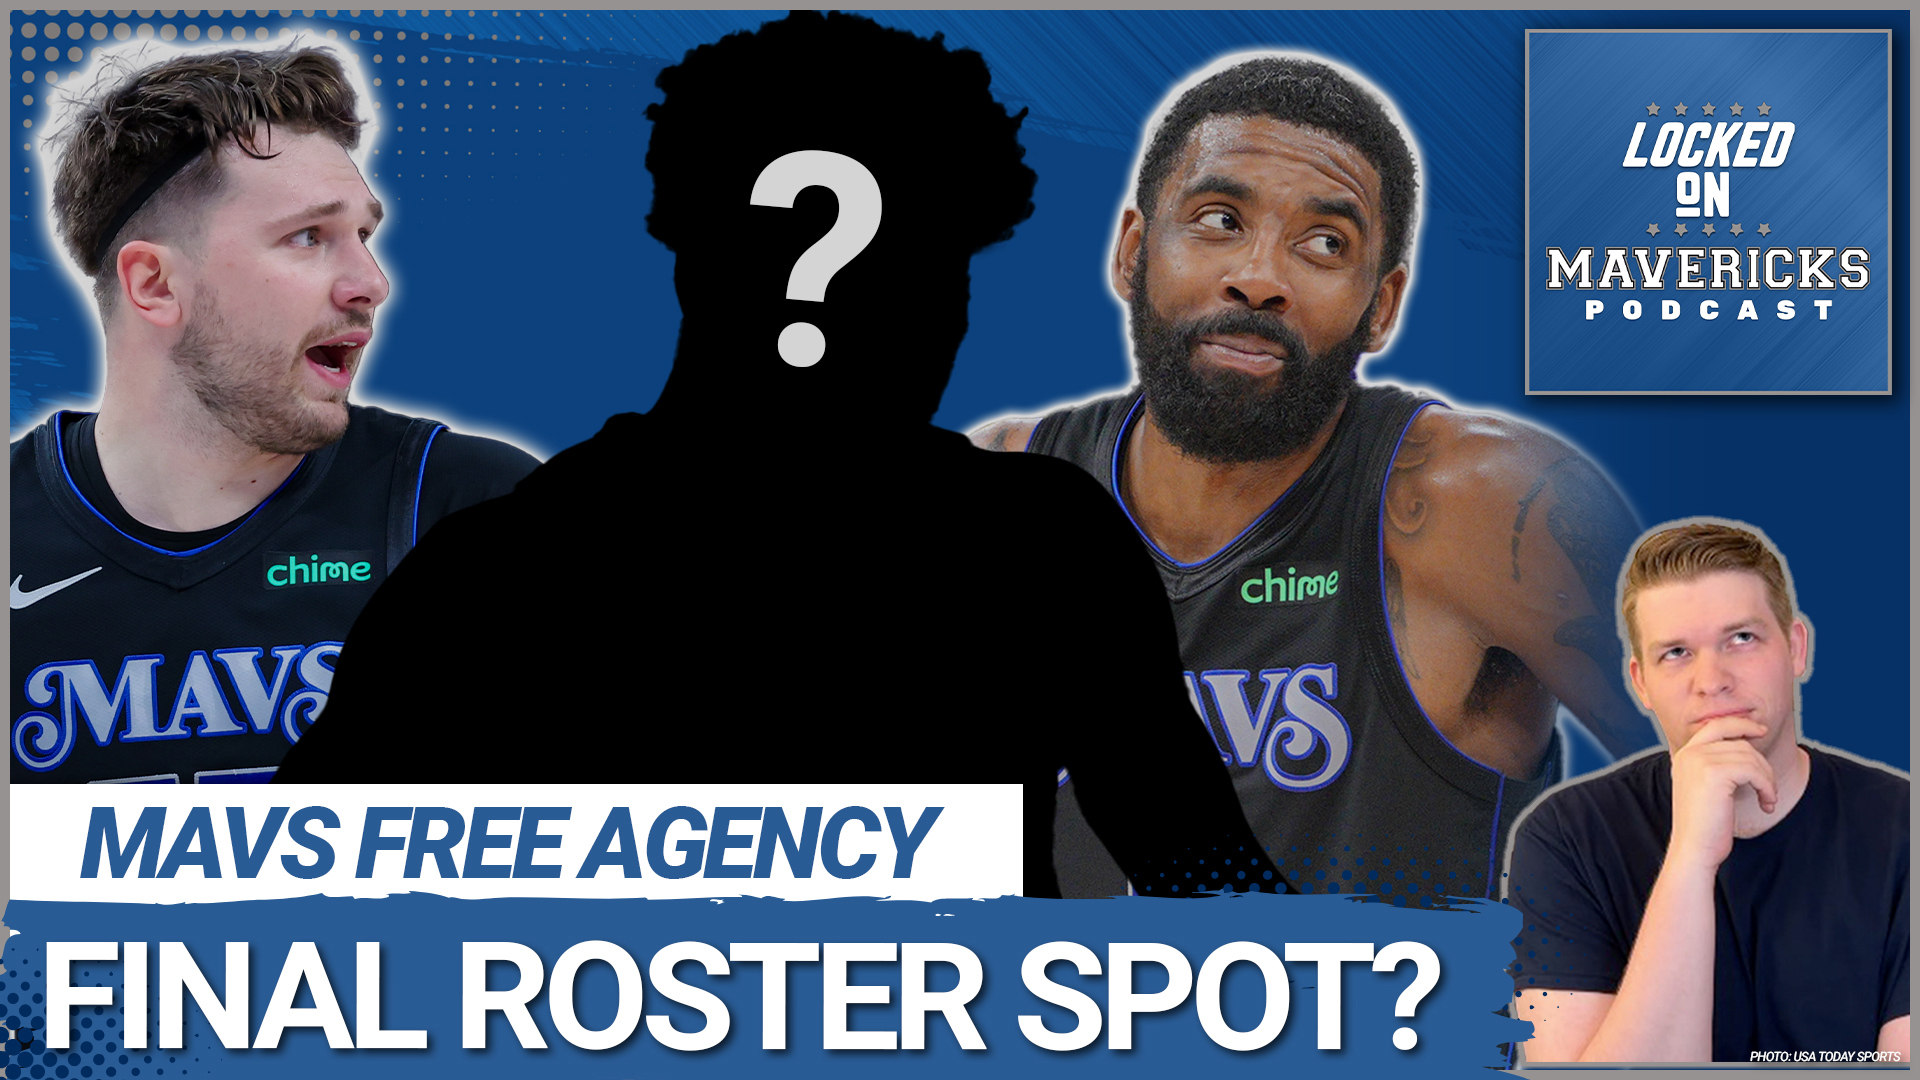 Nick Angstadt discusses the Mavericks' open roster spot and potential candidates to fill it. He breaks down the team's current roster and needs.